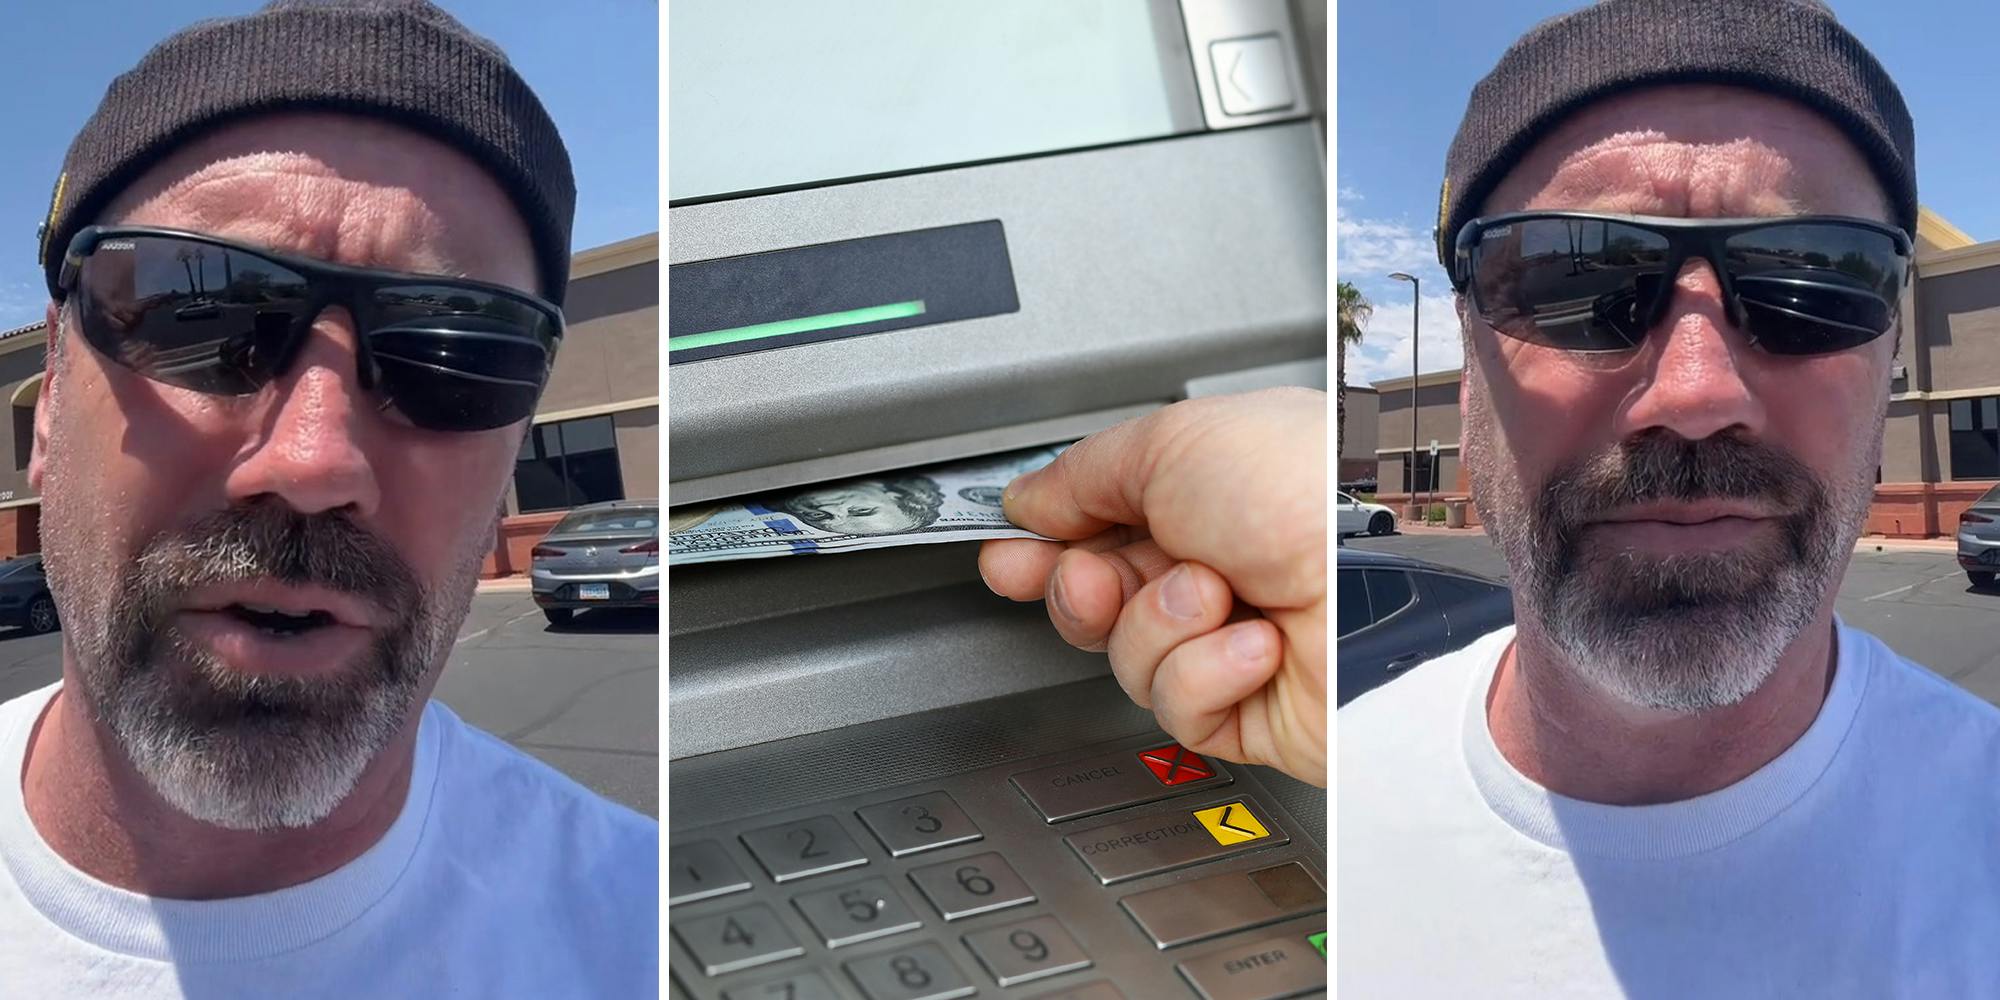 Wells Fargo customer uses ATM for a ‘fast 40.’ He can’t believe what he gets